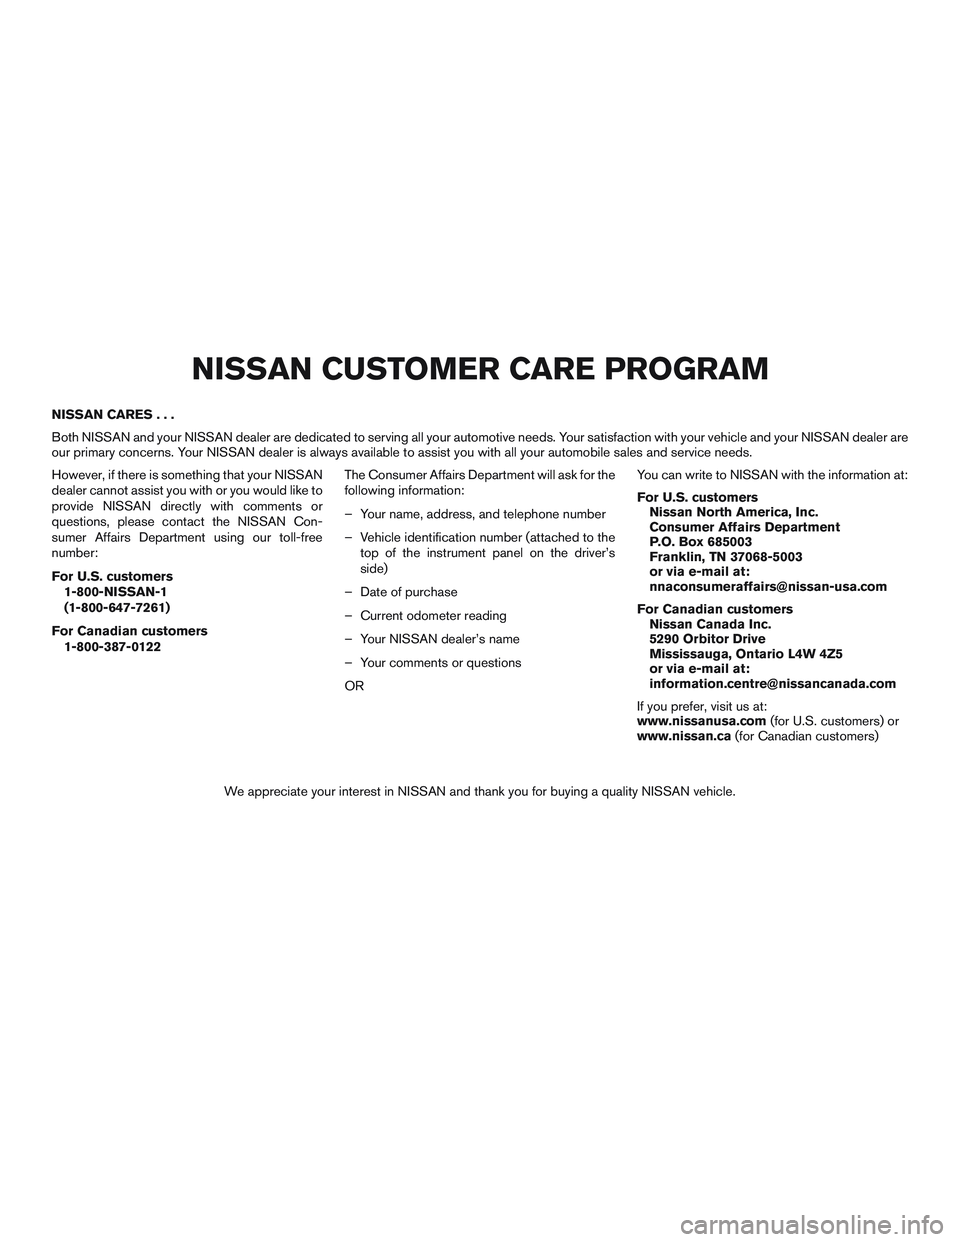 NISSAN PATHFINDER HYBRID 2015  Owners Manual NISSAN CARES...
Both NISSAN and your NISSAN dealer are dedicated to serving all your automotive needs. Your satisfaction with your vehicle and your NISSAN dealer are
our primary concerns. Your NISSAN 